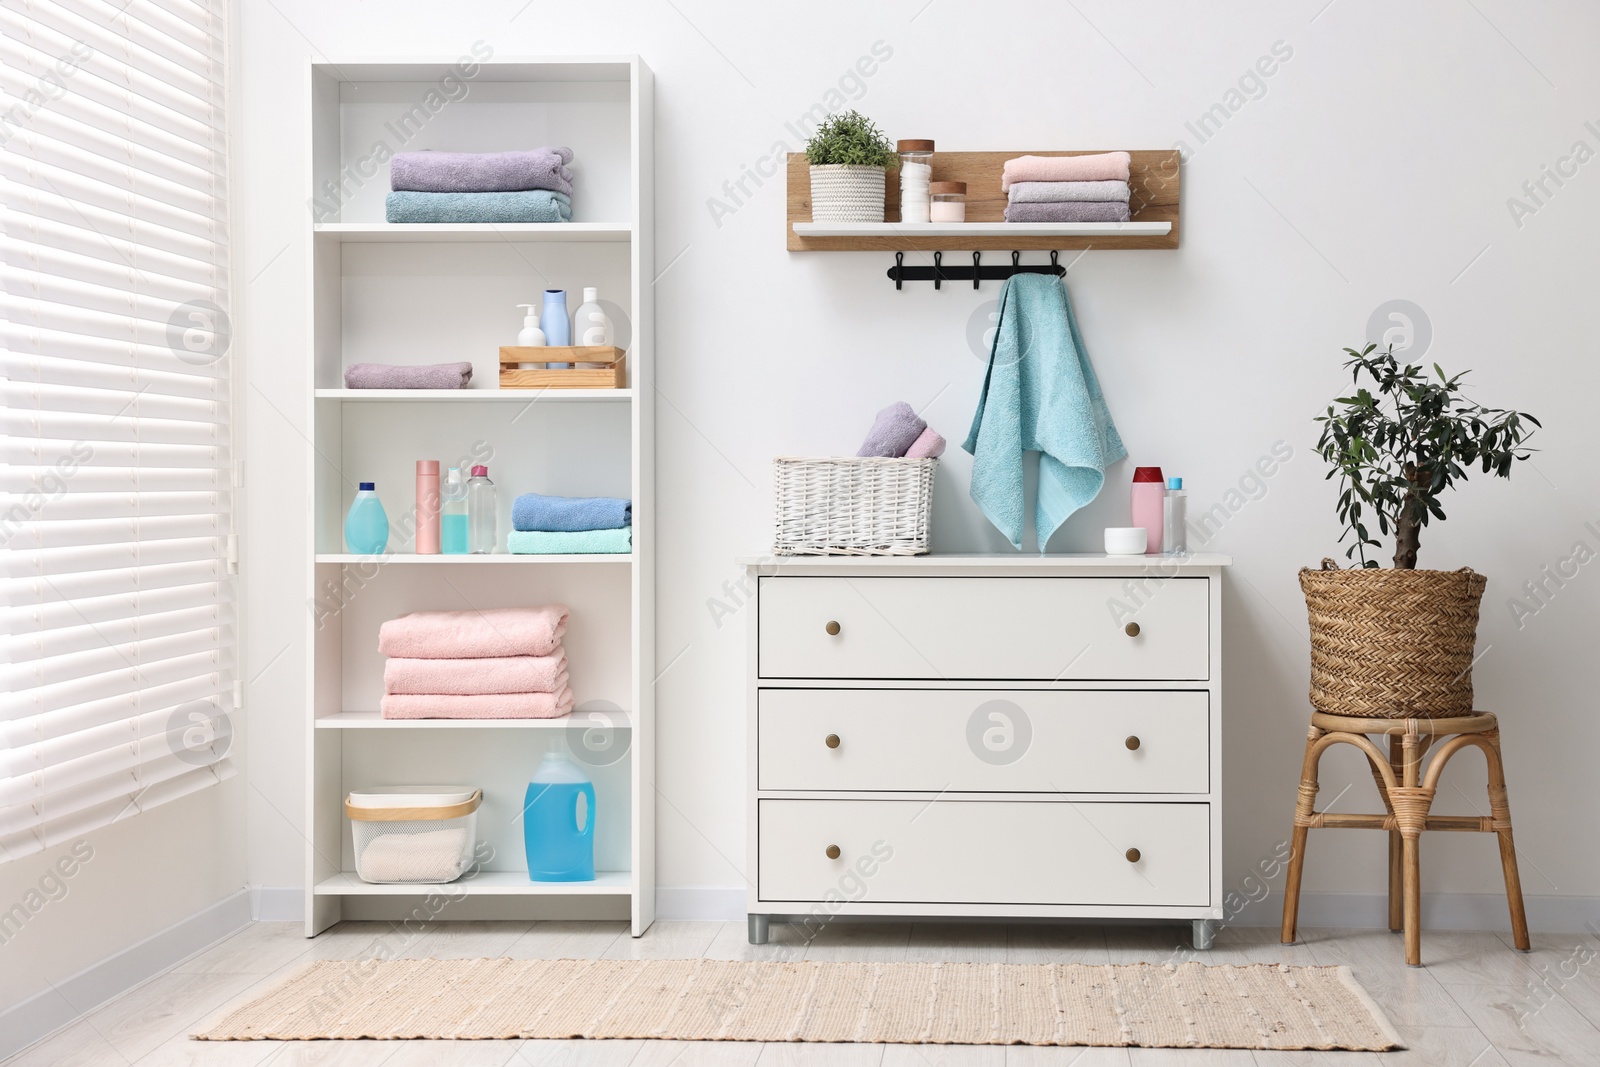 Photo of Shelving unit with stacked clean towels and toiletries in room